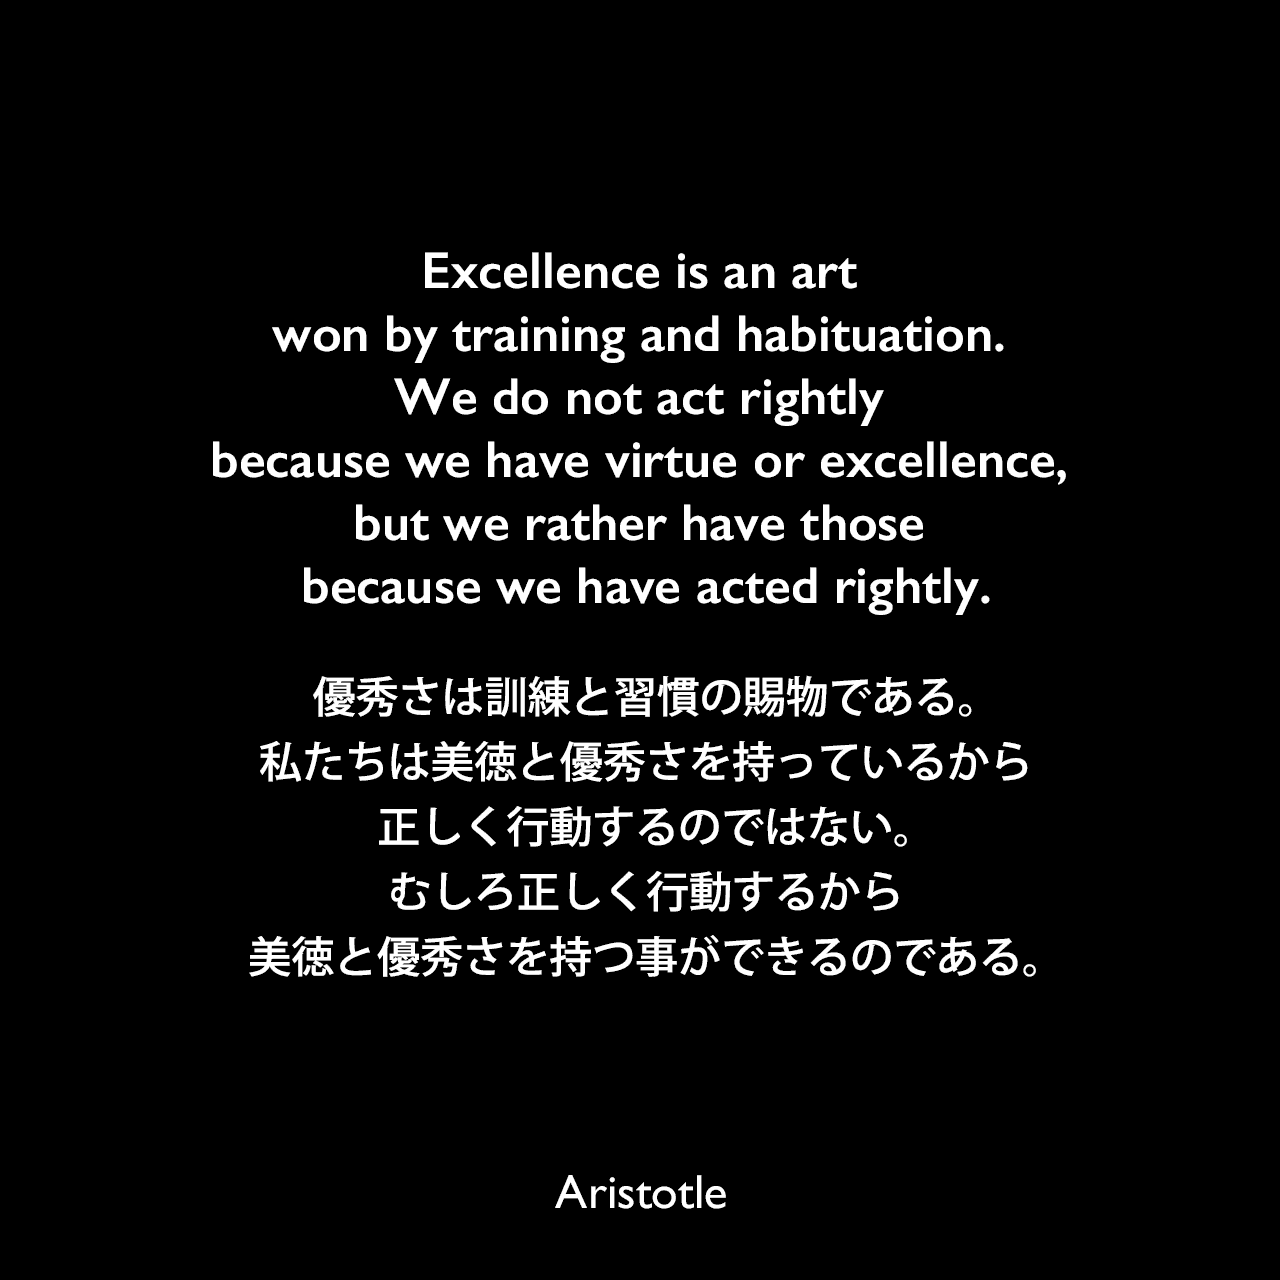 Excellence is an art won by training and habituation. We do not act rightly because we have virtue or excellence, but we rather have those because we have acted rightly.優秀さは訓練と習慣の賜物である。私たちは美徳と優秀さを持っているから正しく行動するのではない。むしろ正しく行動するから美徳と優秀さを持つ事ができるのである。Aristotle